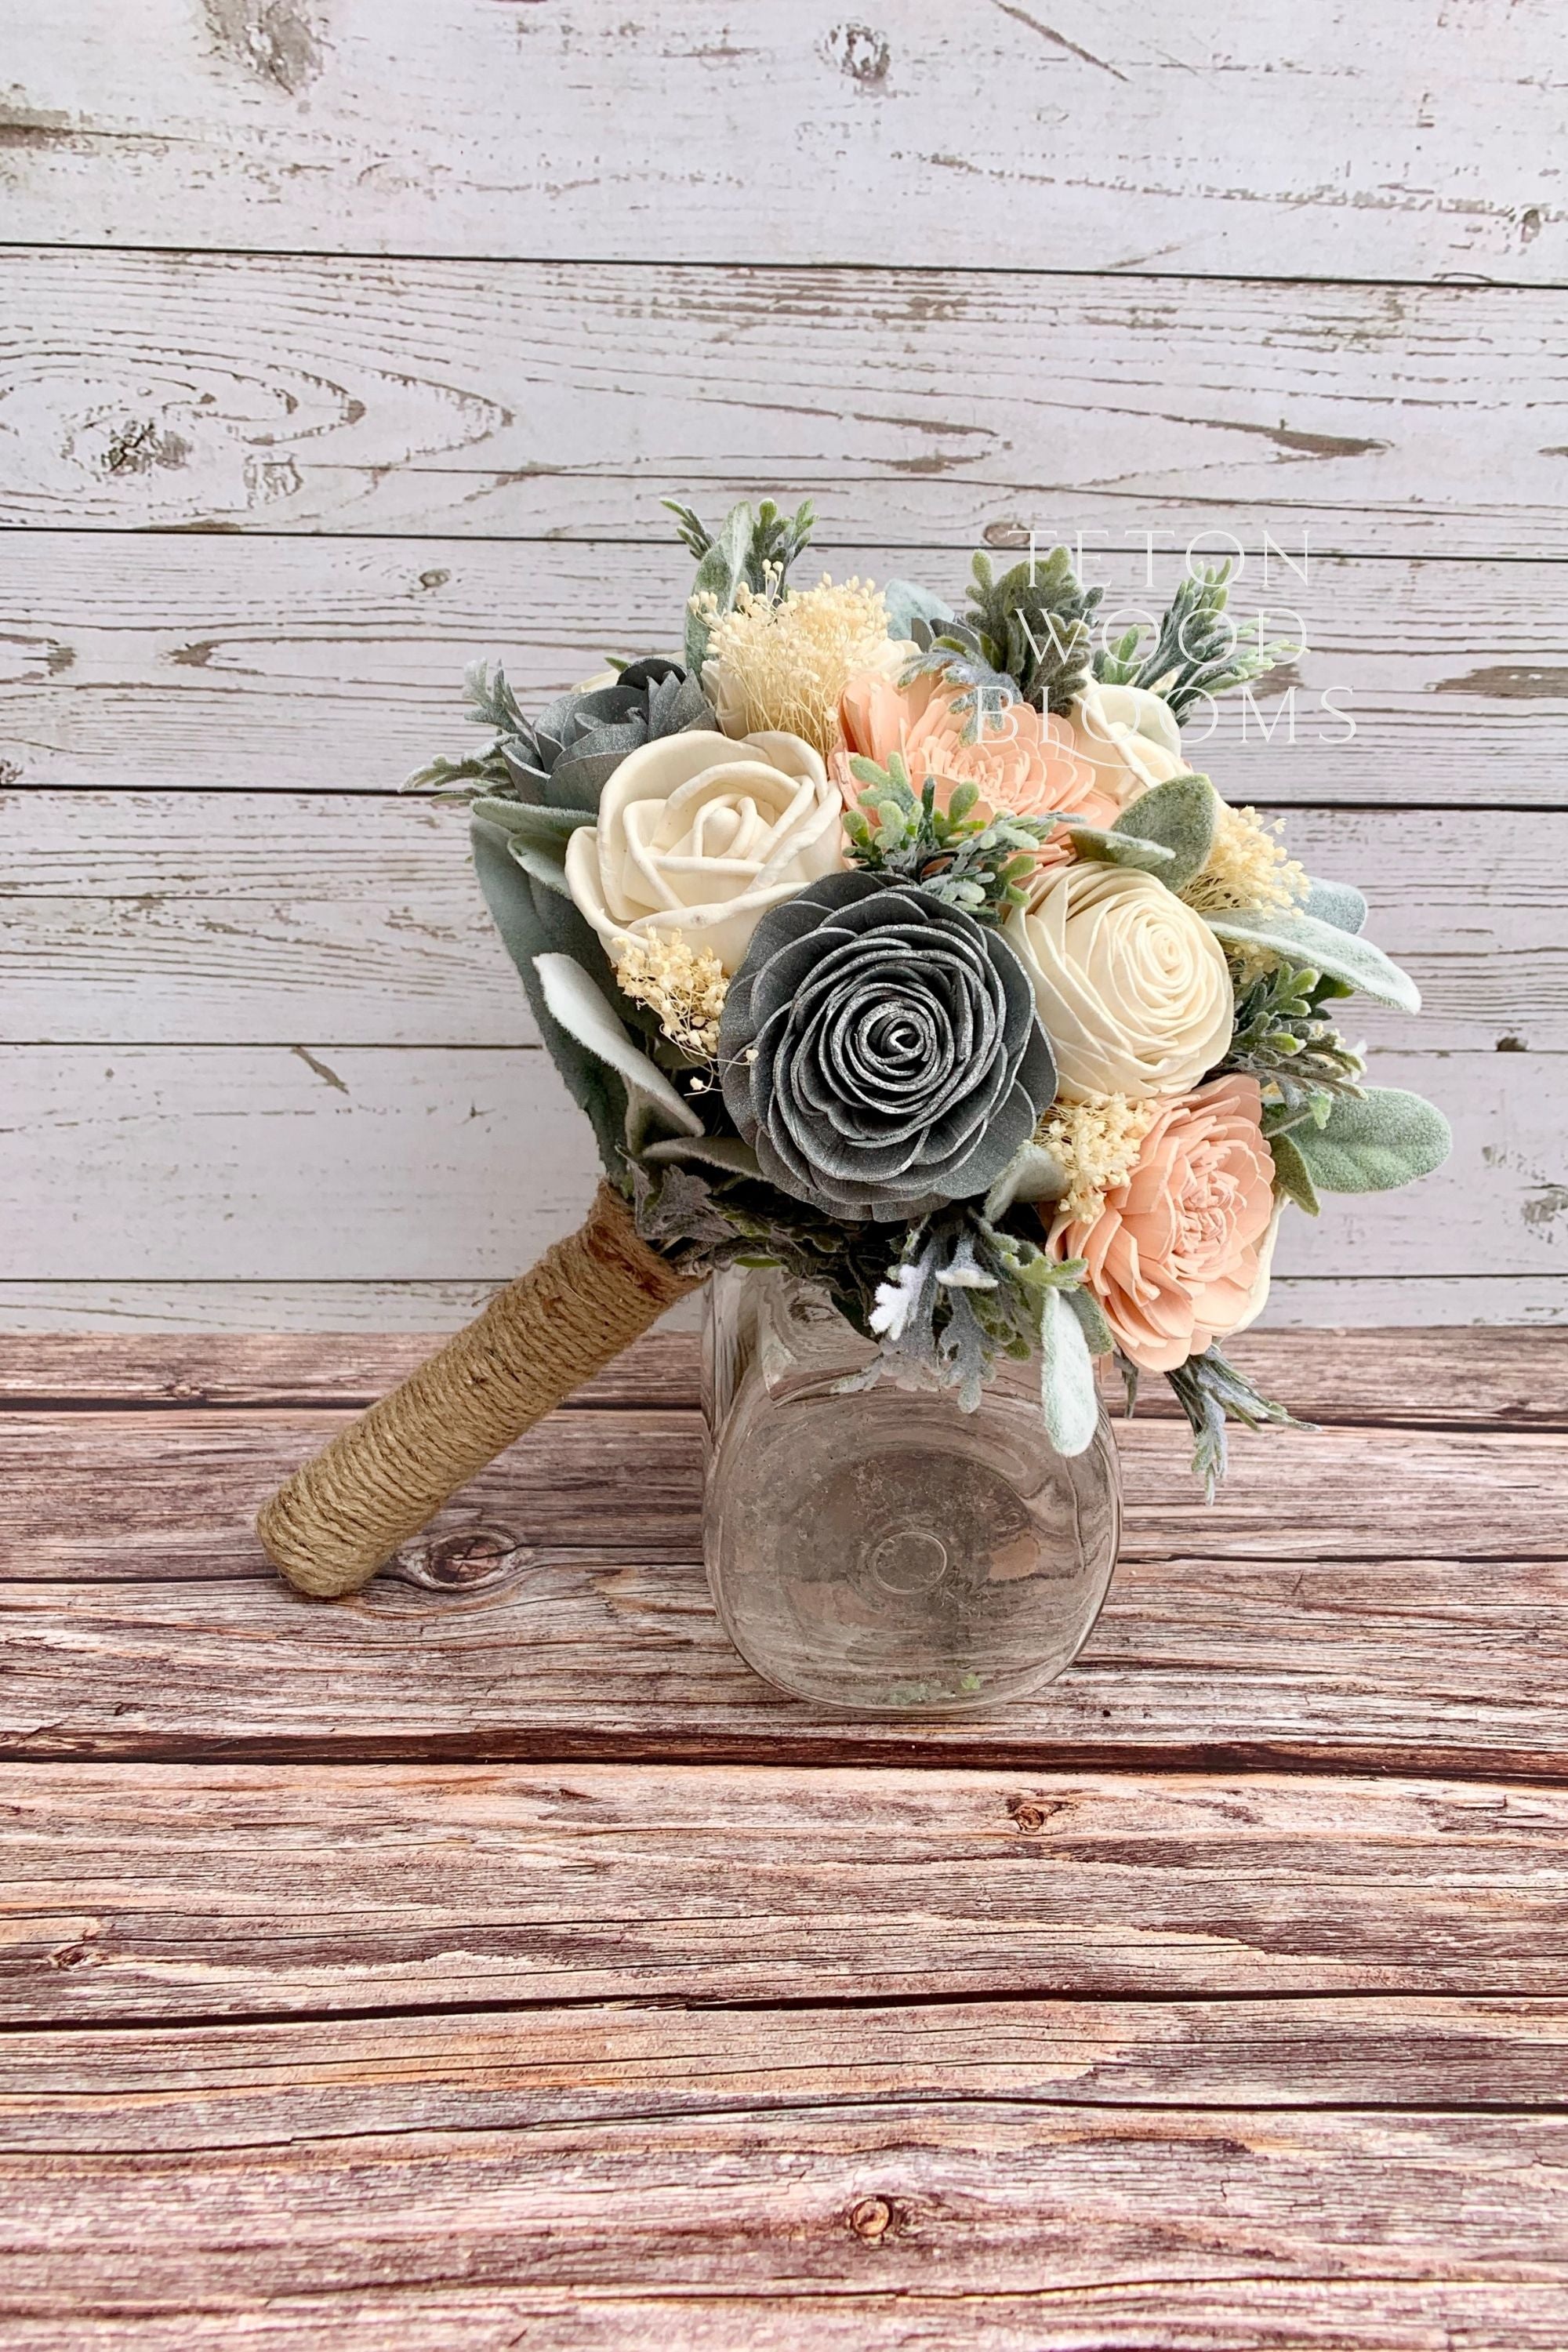 Rustic Blush and Baby's Breath Bouquet